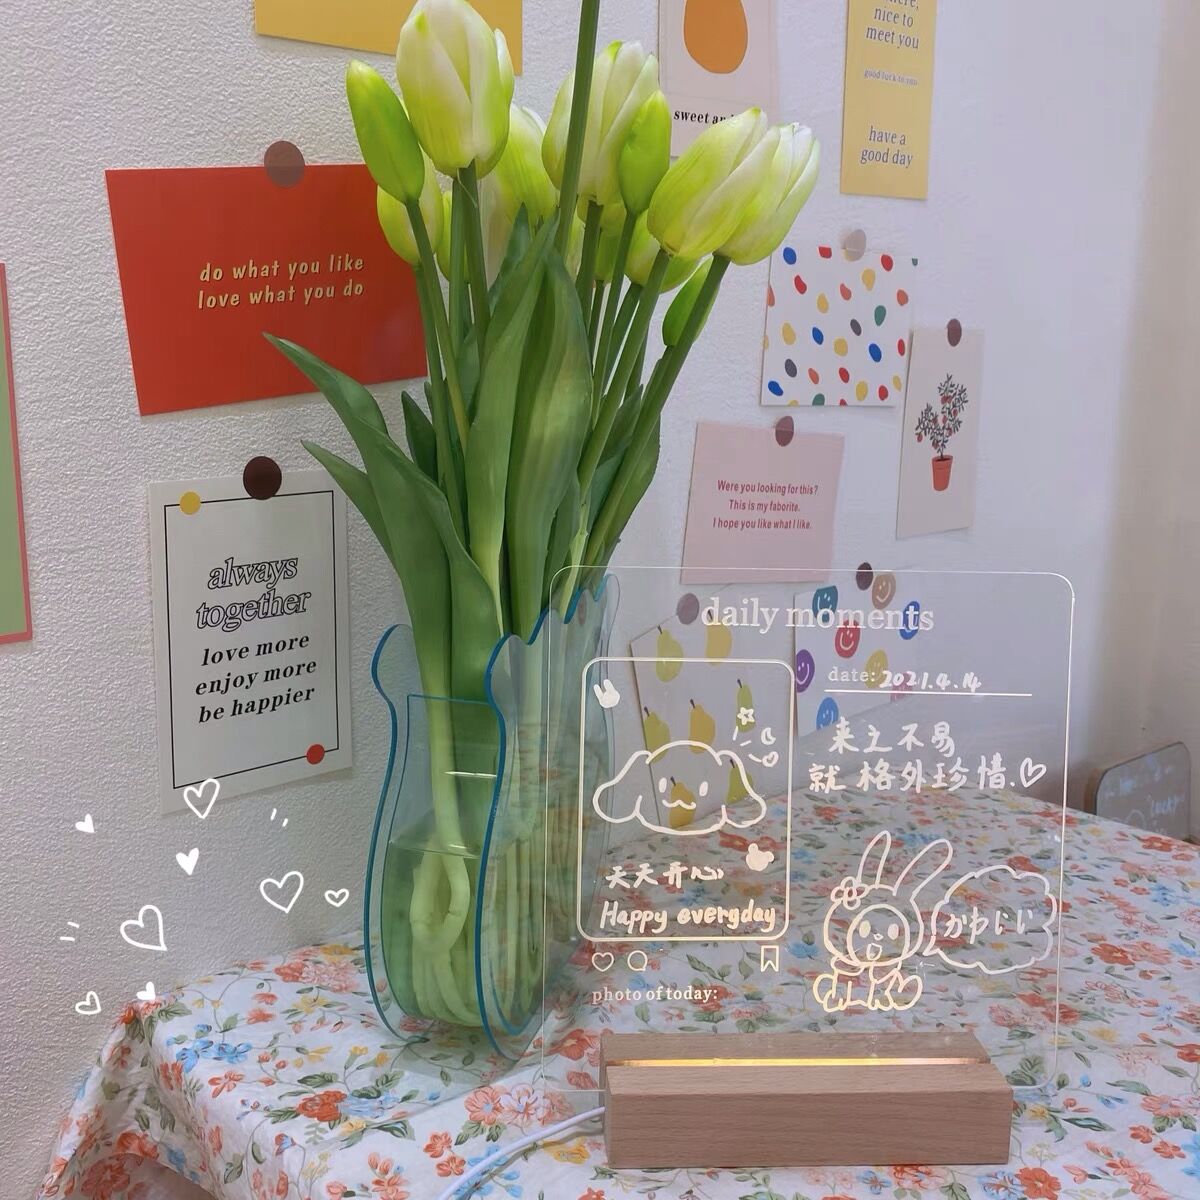 A vibrant LED memo board adorned with handwritten notes and drawings, highlighted by a warm backlight. The clear board, part of a colorful room decor, stands out amidst a bouquet of tulips and various decorative wall elements, creating an inviting and cheerful space.